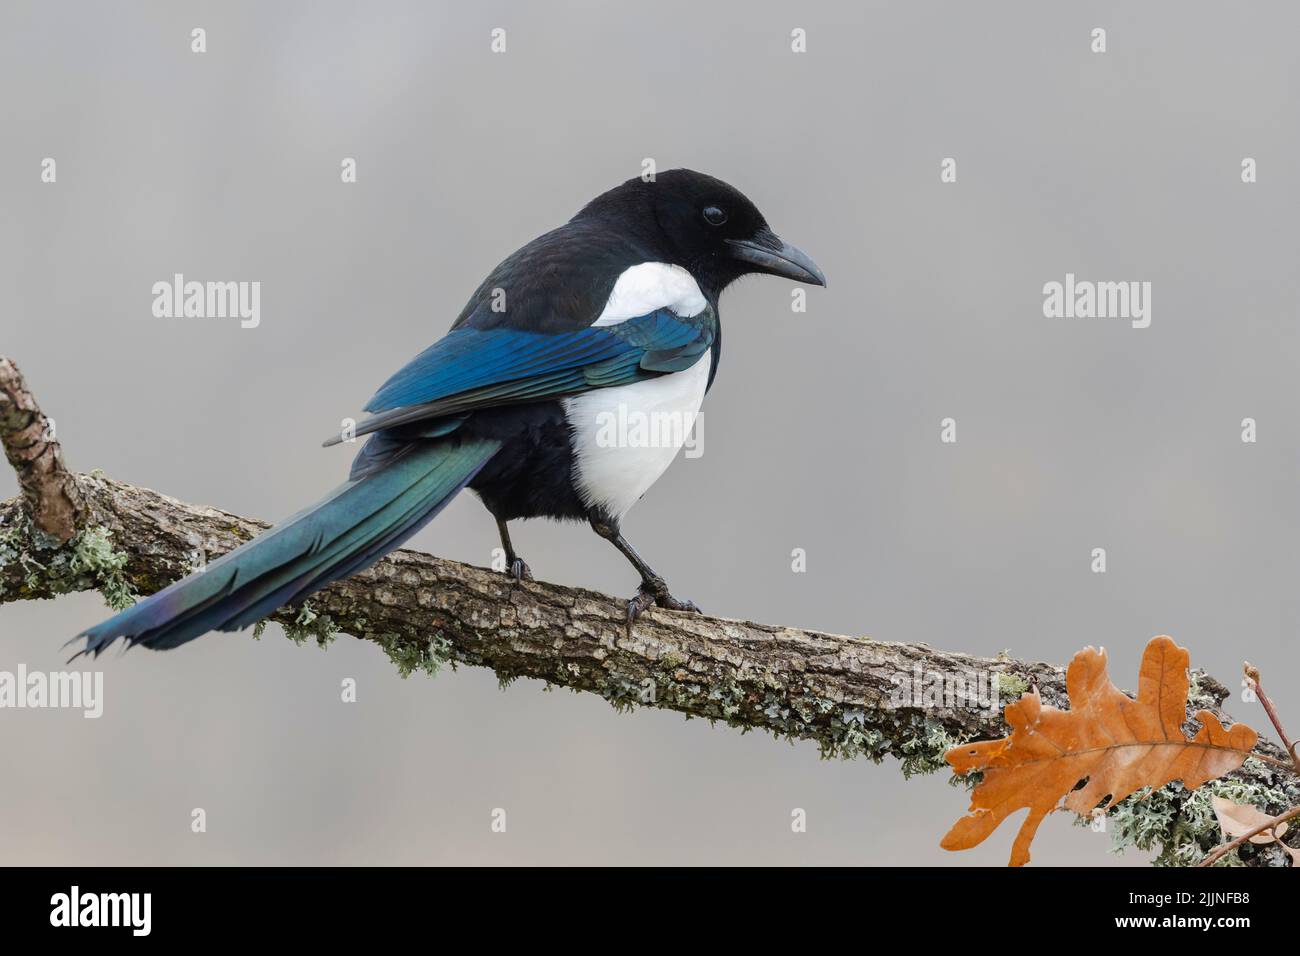 Common magpie, pica pica, perched on a tree branch on a uniform light background. Stock Photo